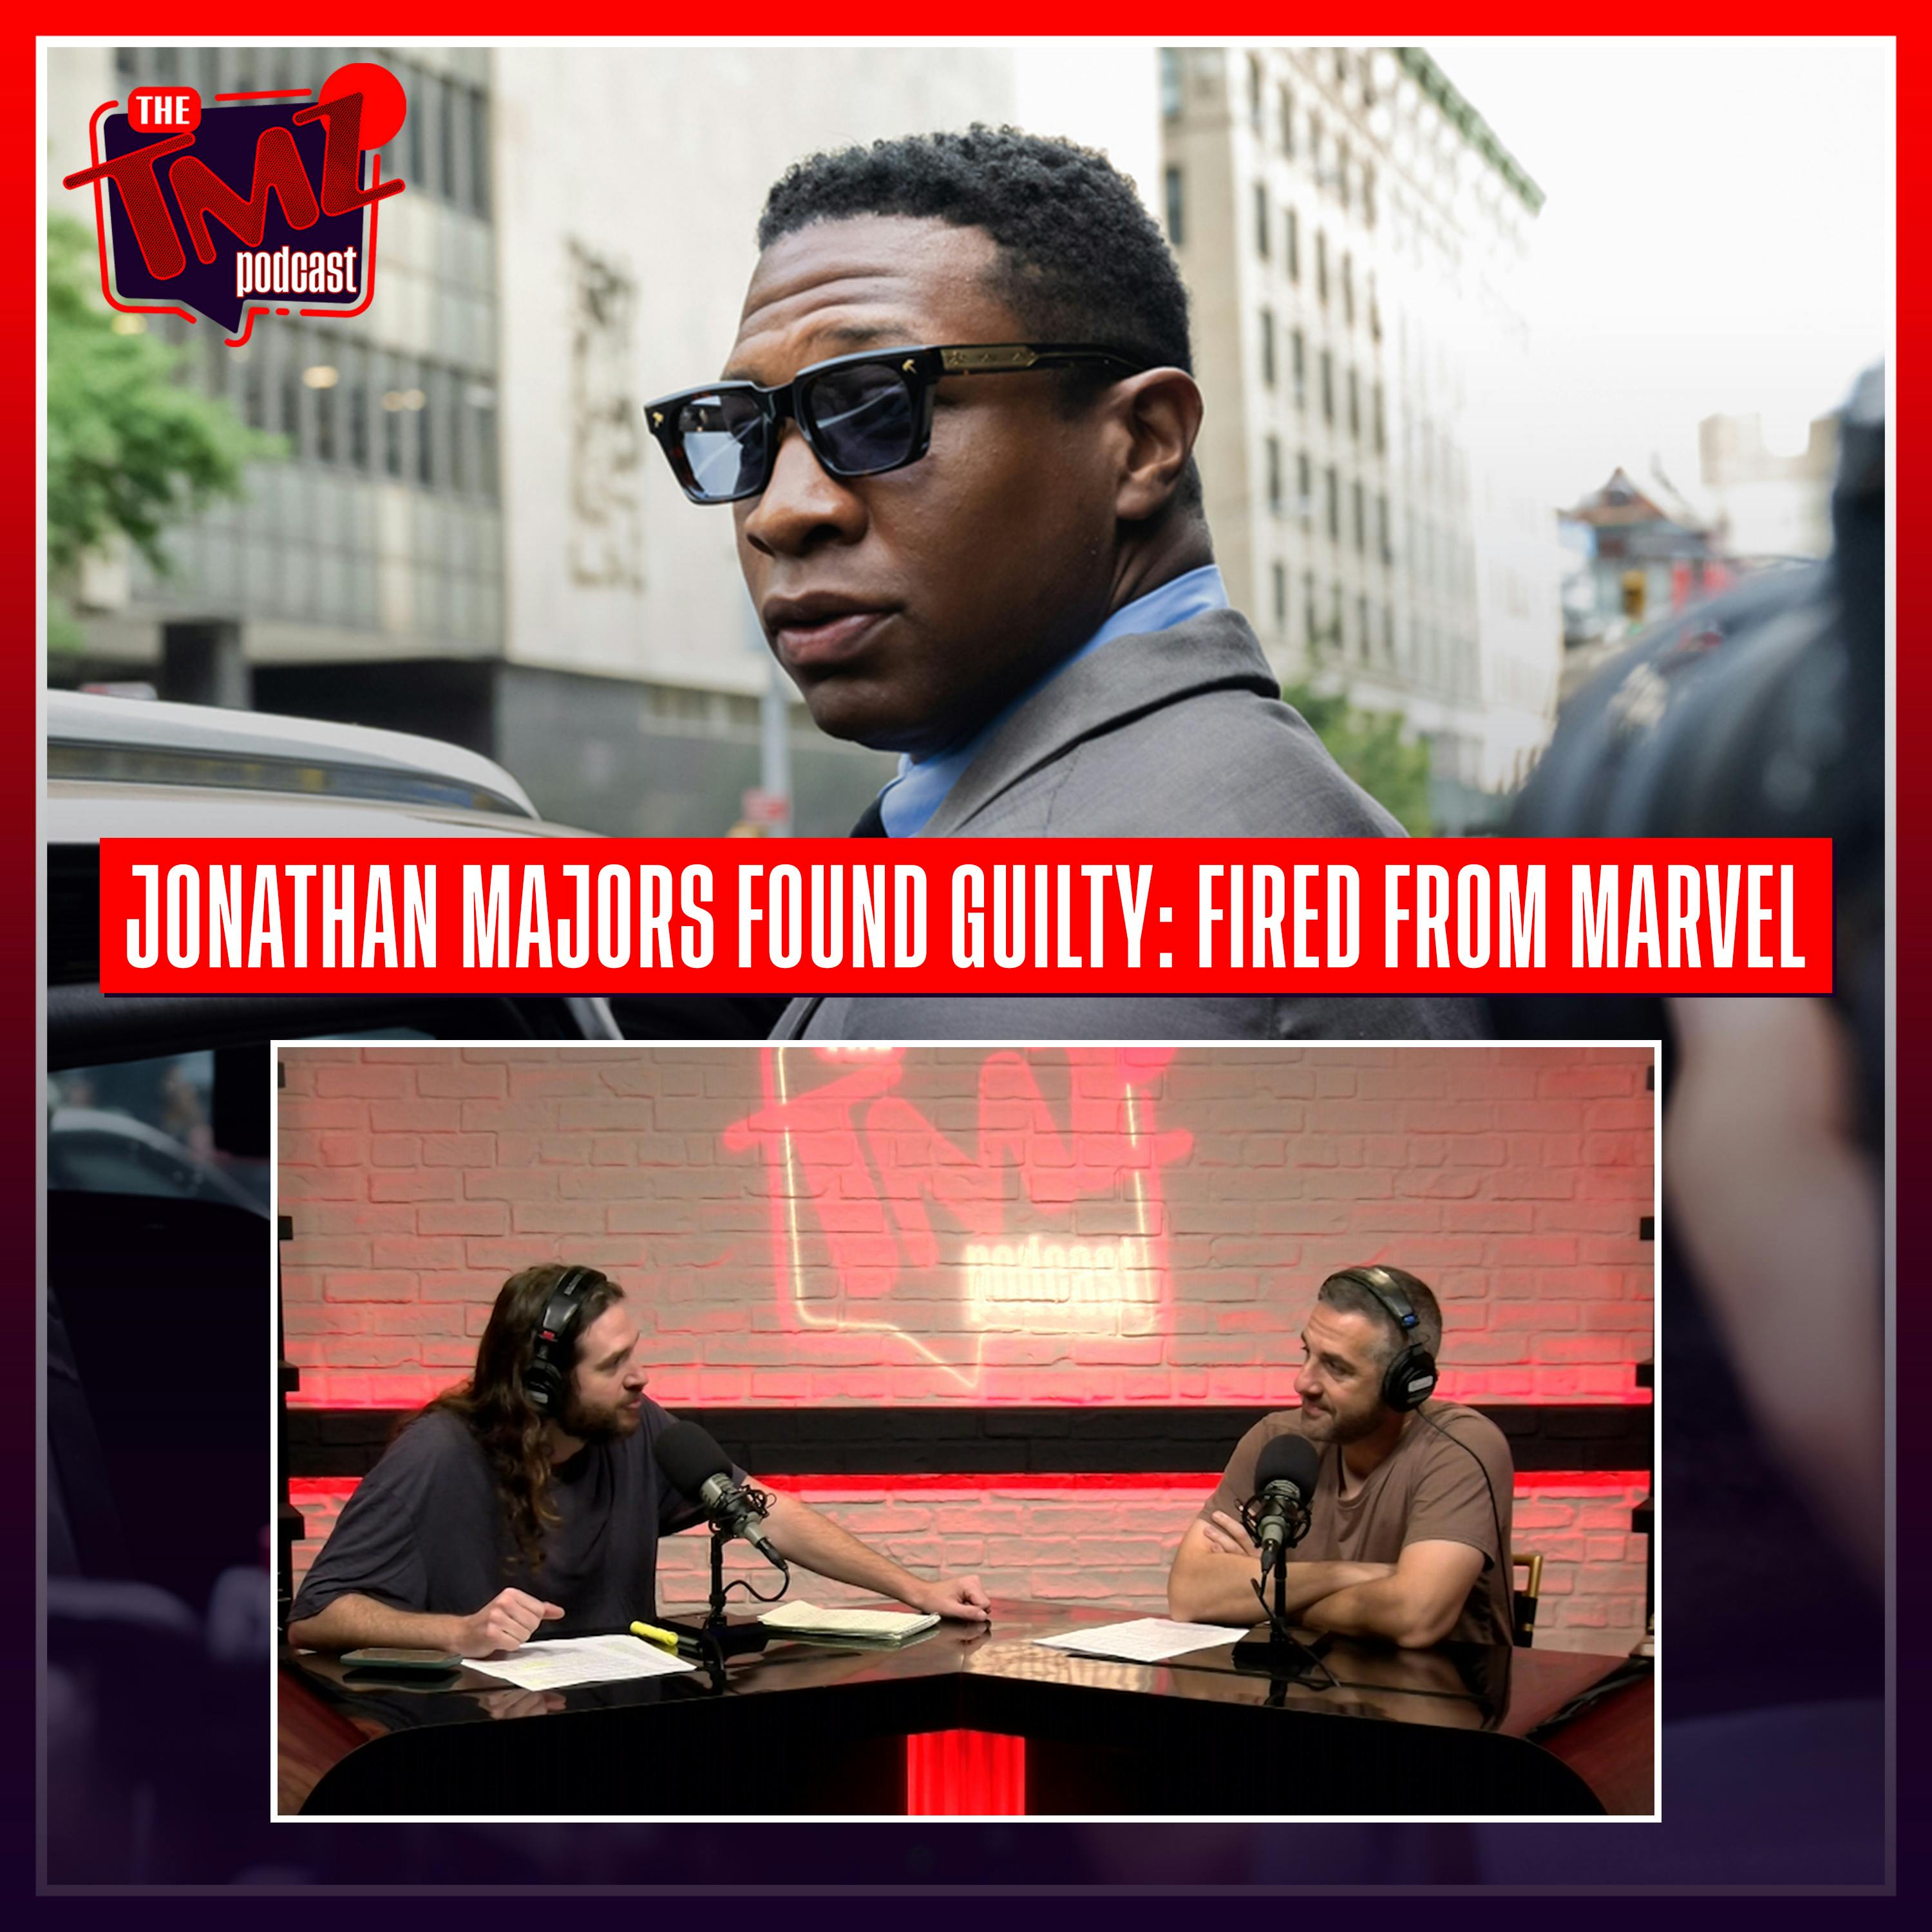 Jonathan Majors Found Guilty: Dropped By Marvel After Verdict